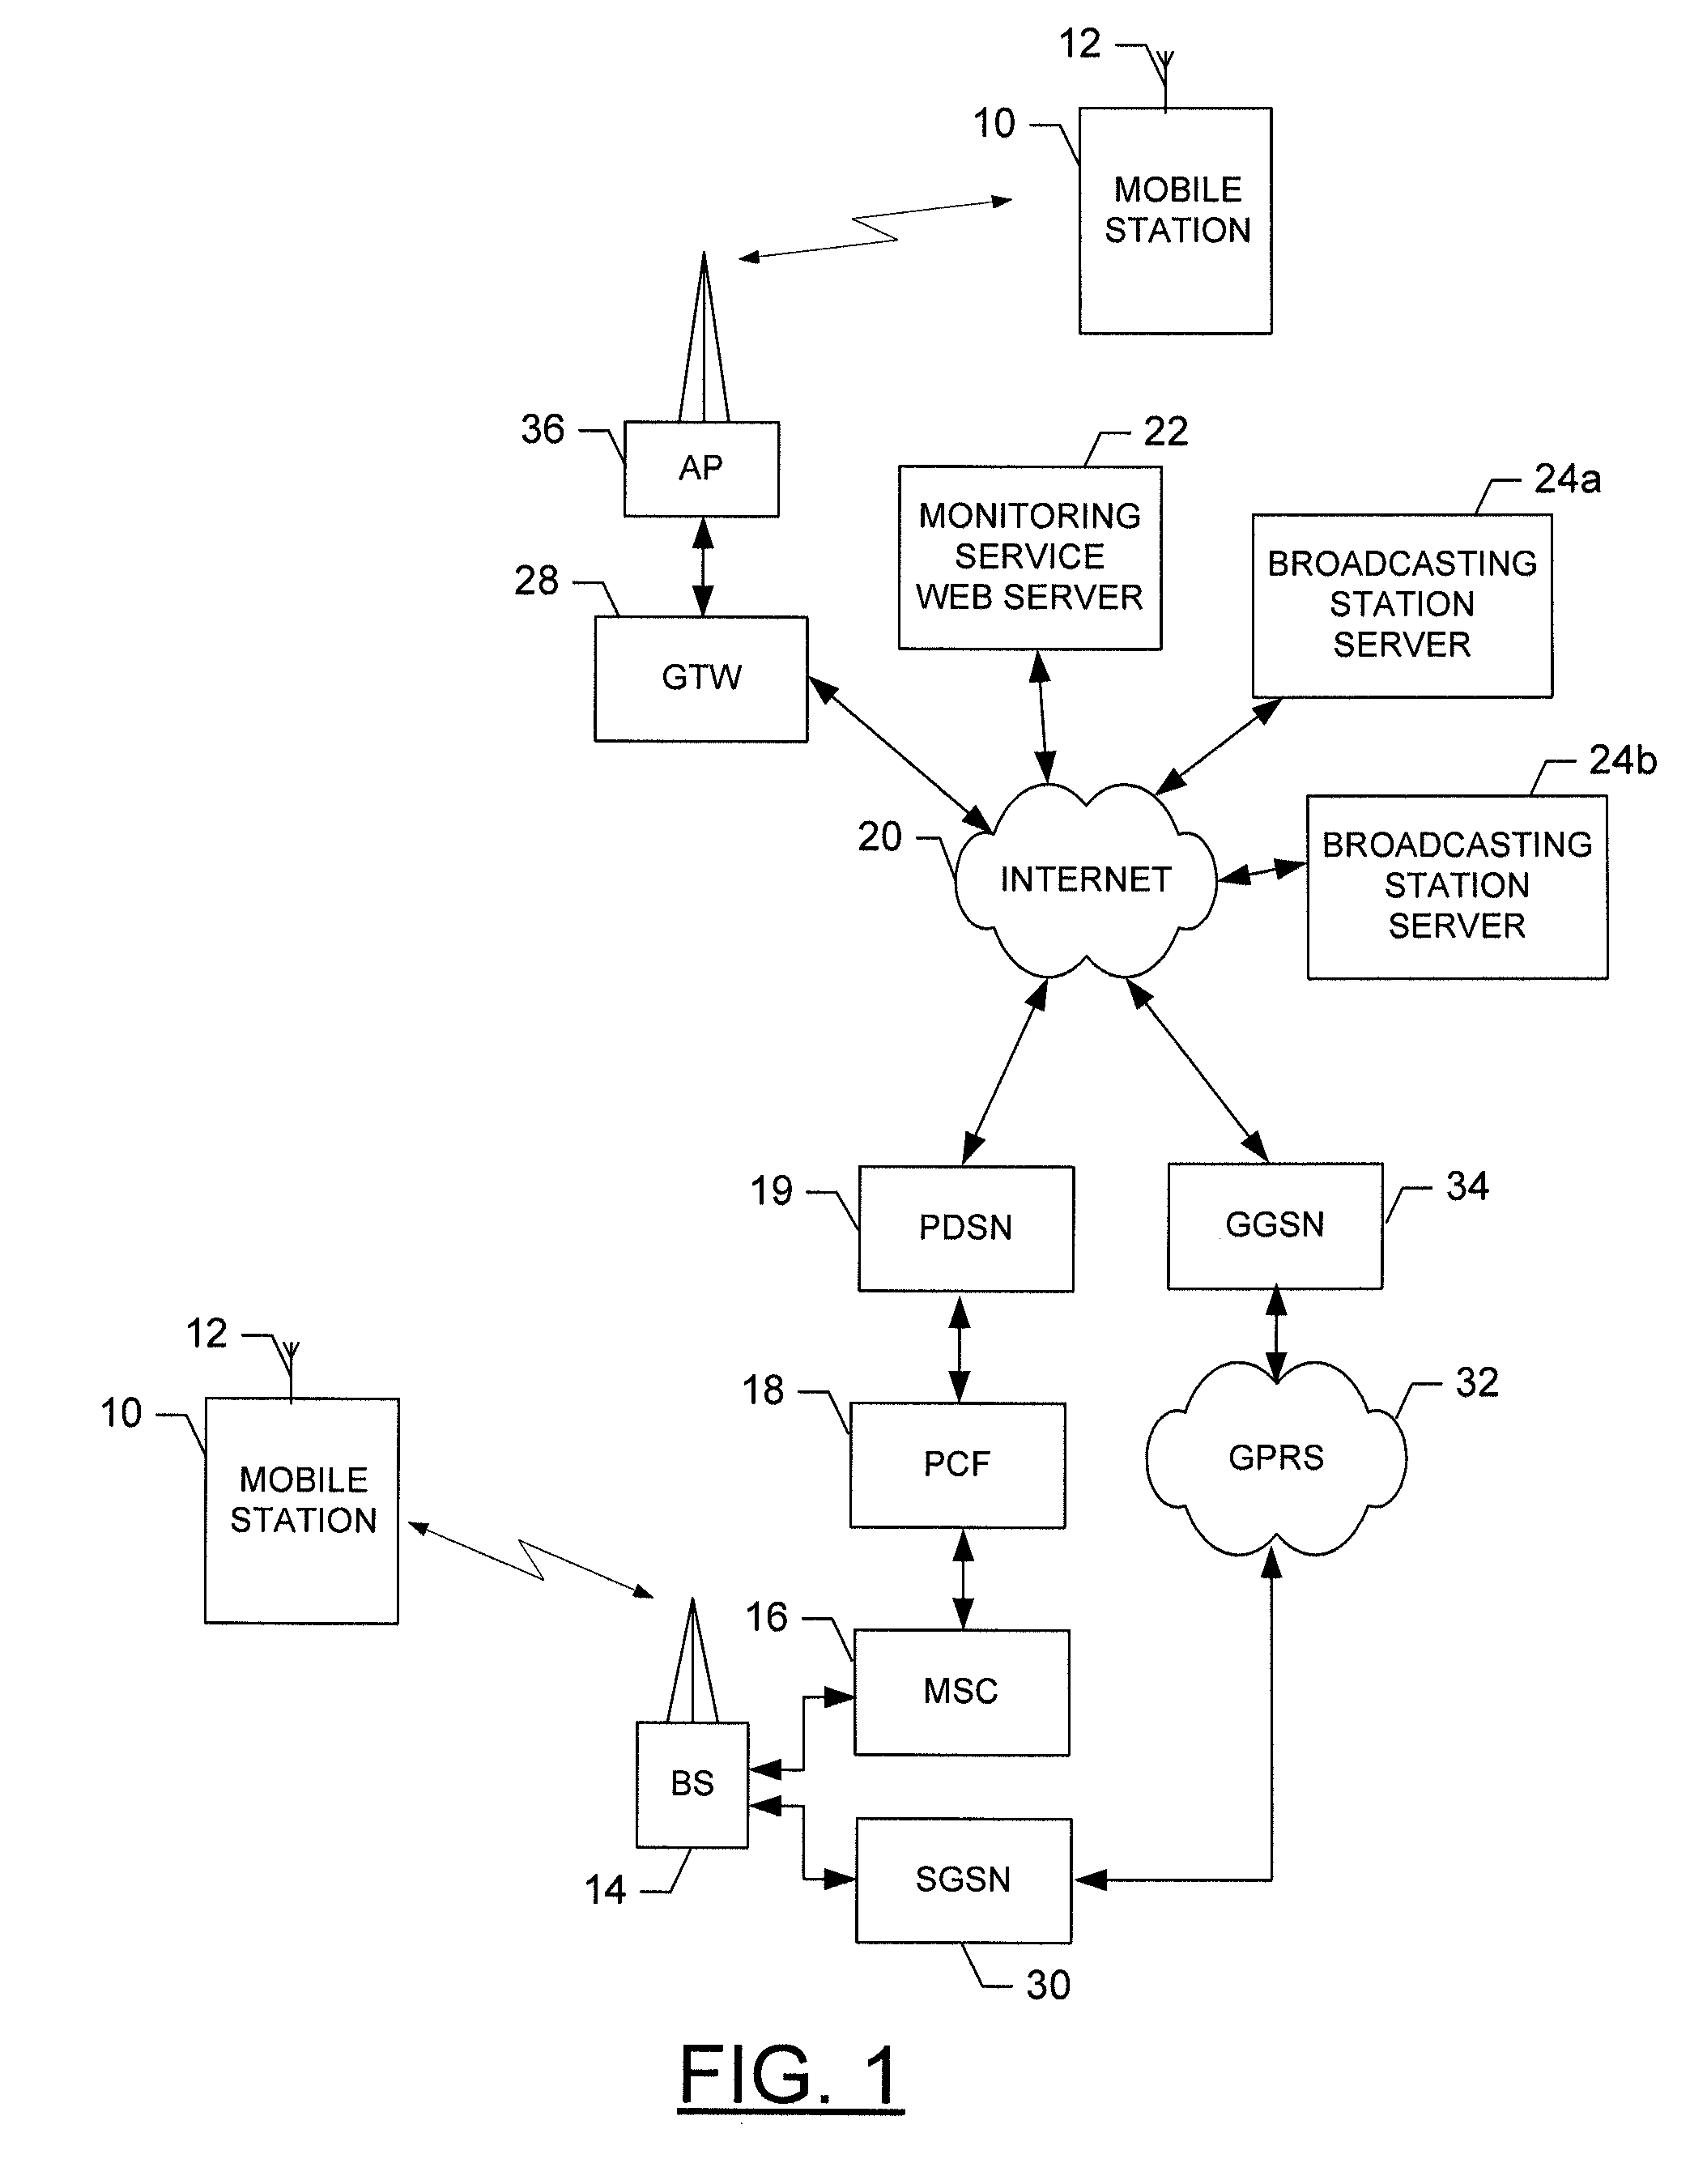 Apparatus, method and computer program product for generating a personalized visualization of broadcasting stations